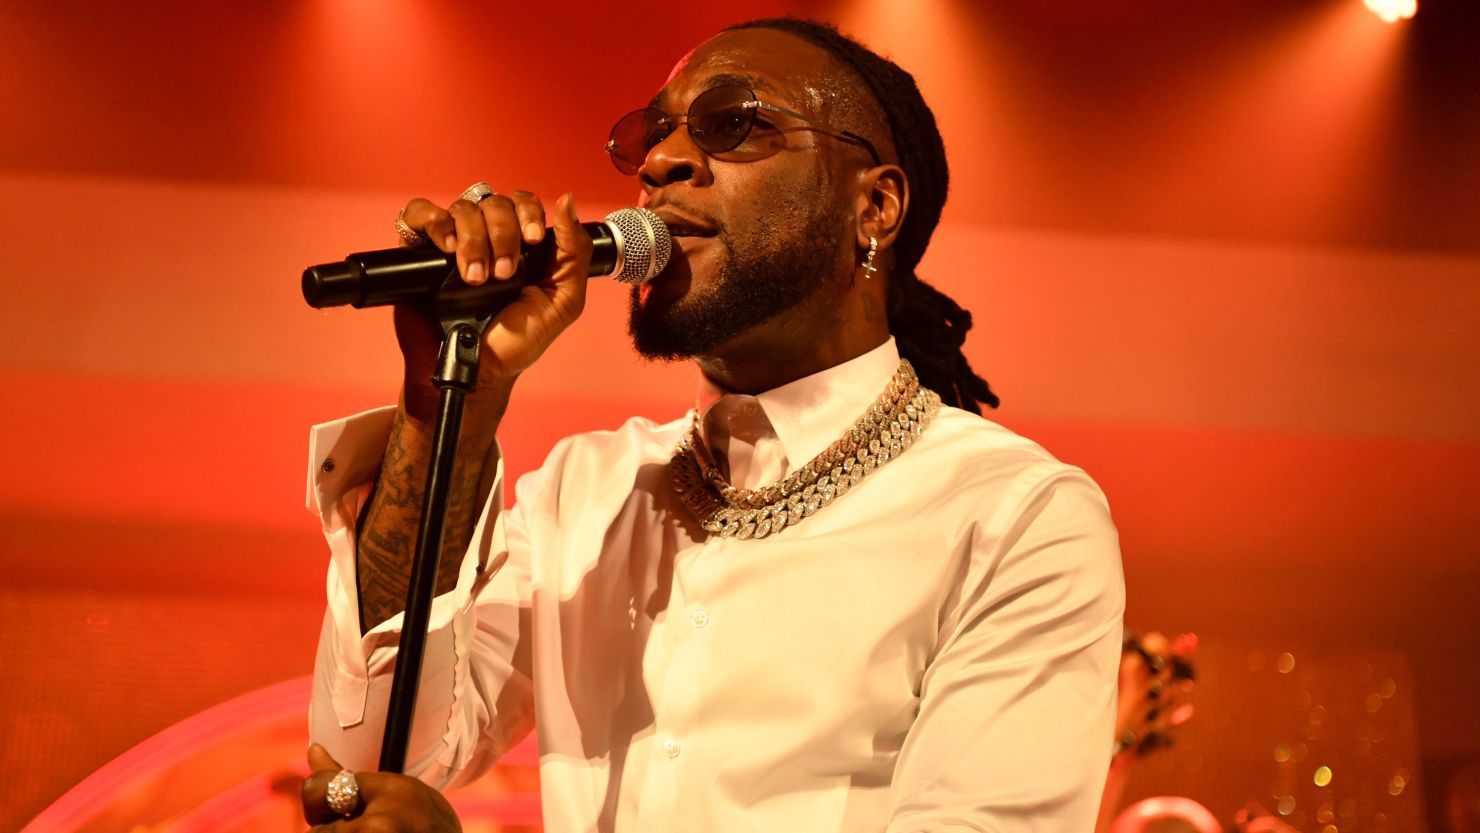 Burna Boy performs onstage at the pre-Grammy party at Hollywood Athletic Club on January 23, 2020